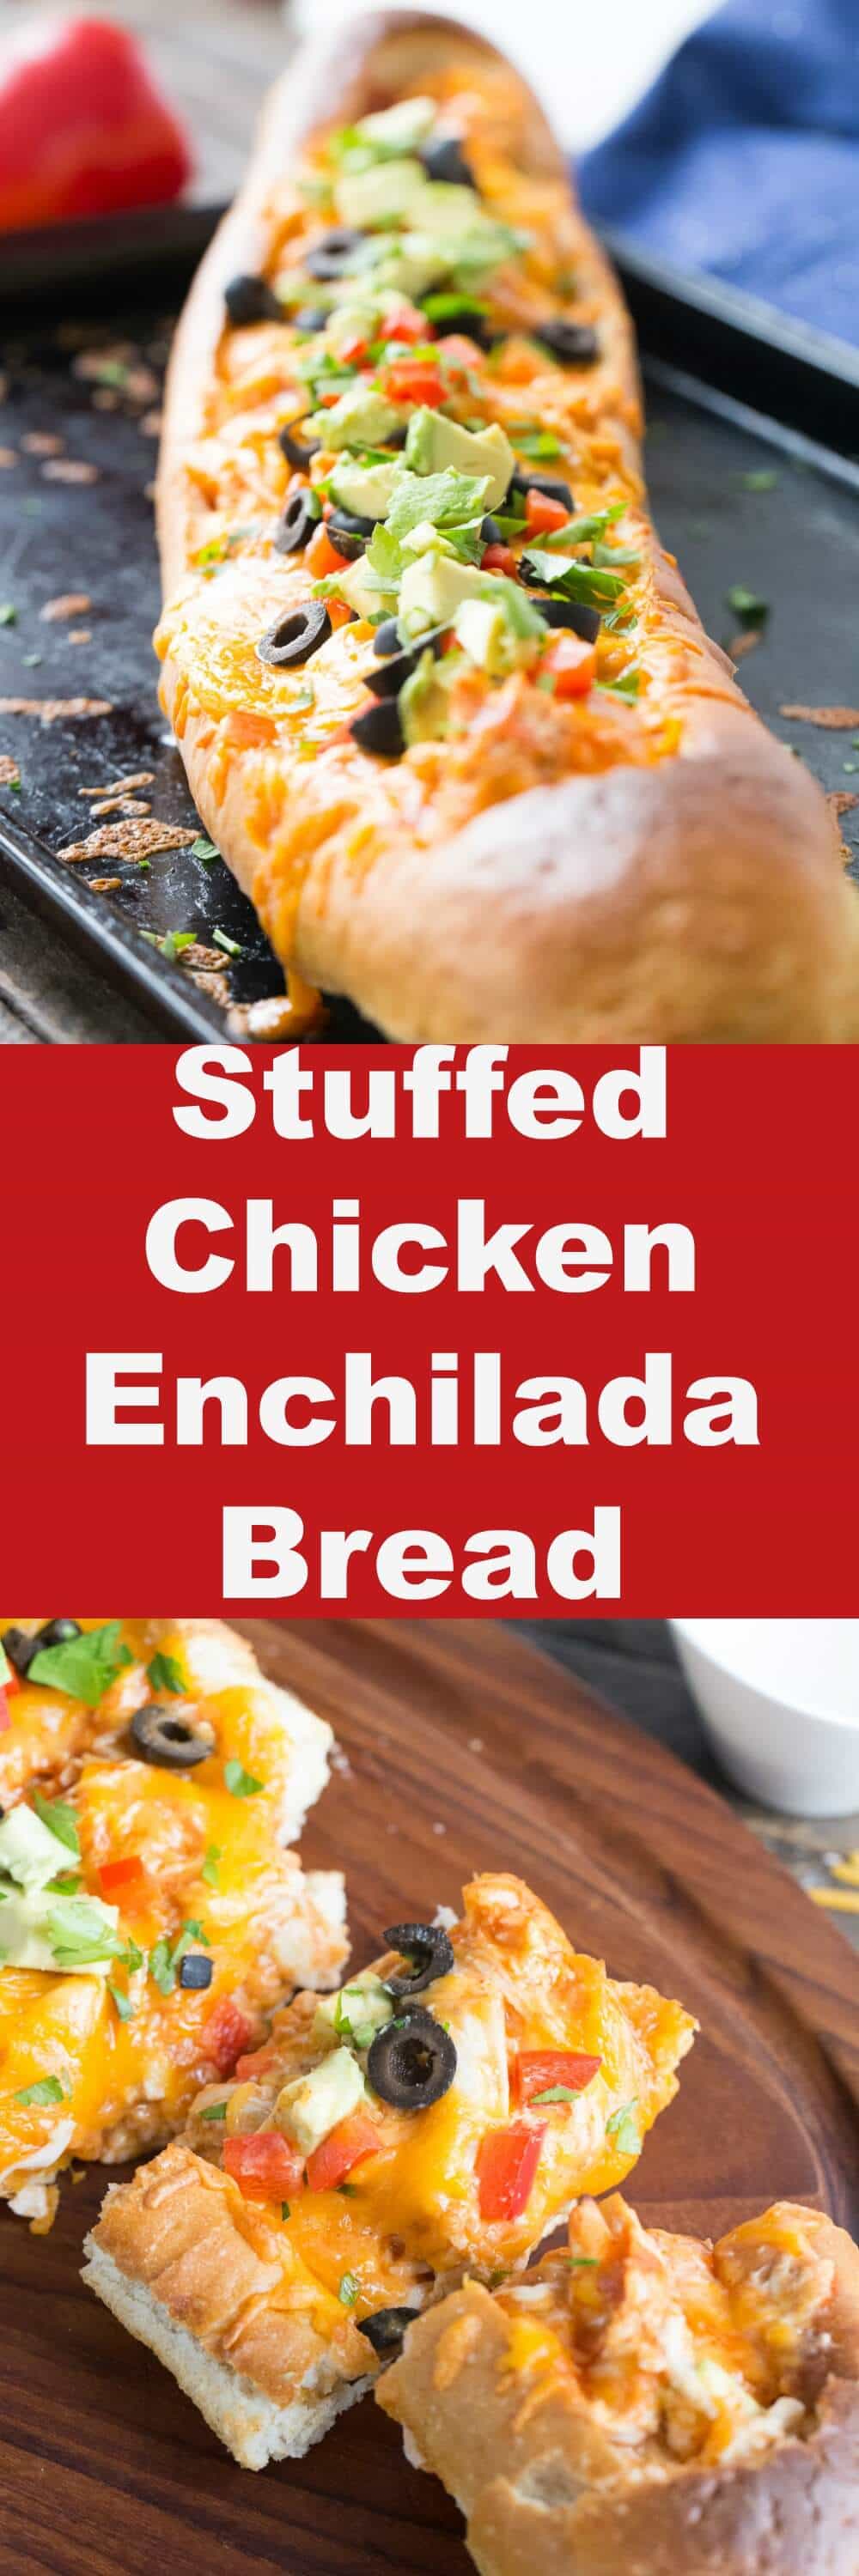 Chicken enchiladas are stuffed inside a loaf of French bread then baked until golden. Top your enchilada bread with your favorite ingredients and then gobble it up!